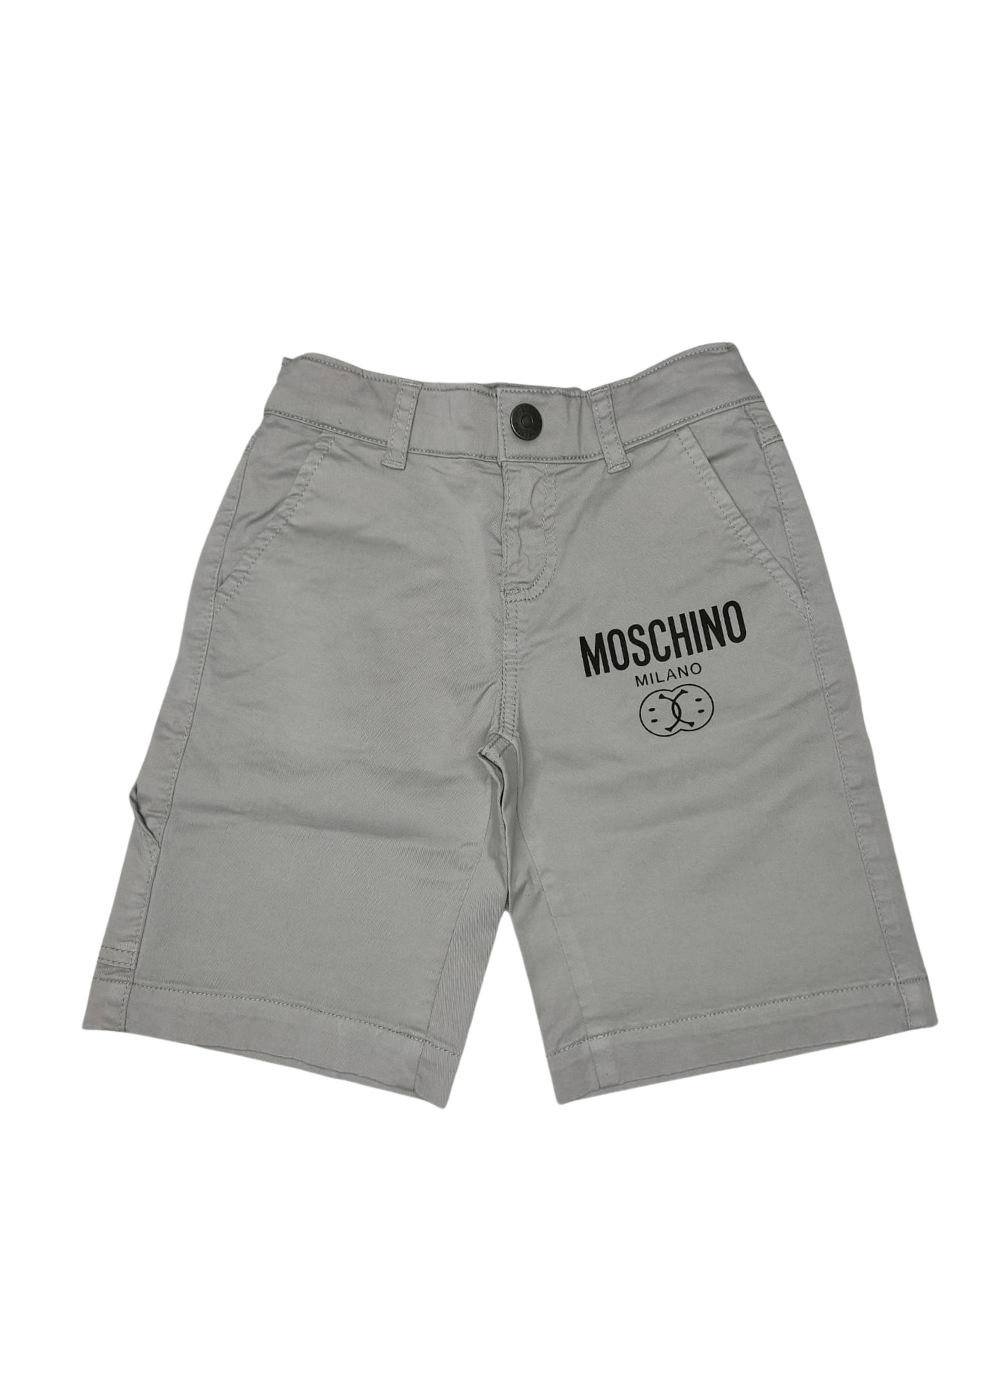 Featured image for “Moschino Bermuda”